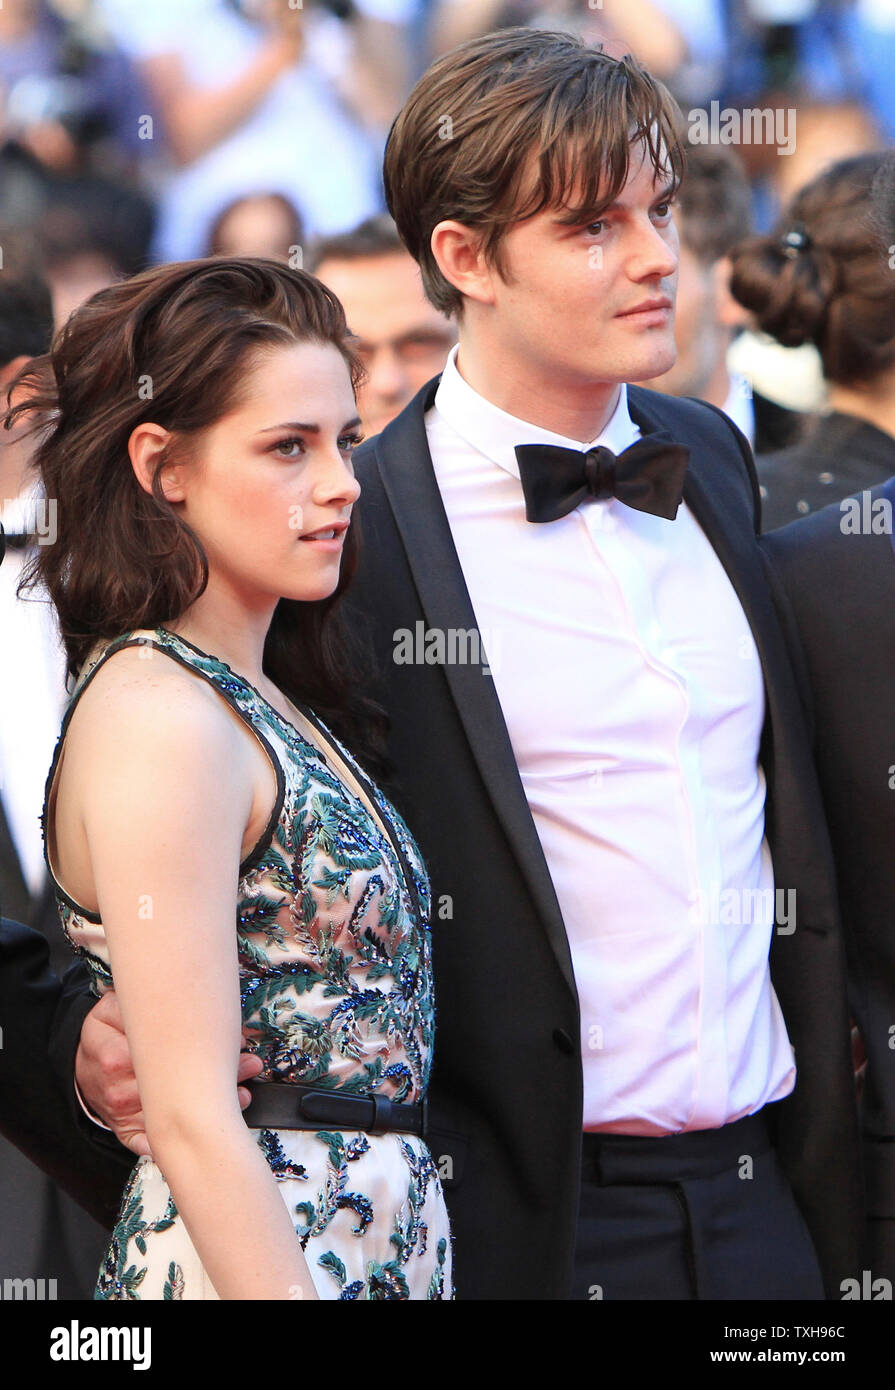 Kristen Stewart (L) and Sam Riley arrive on the red carpet before the screening of the film 'On The Road' during the 65th annual Cannes International Film Festival in Cannes, France on May 23, 2012.  UPI/David Silpa Stock Photo